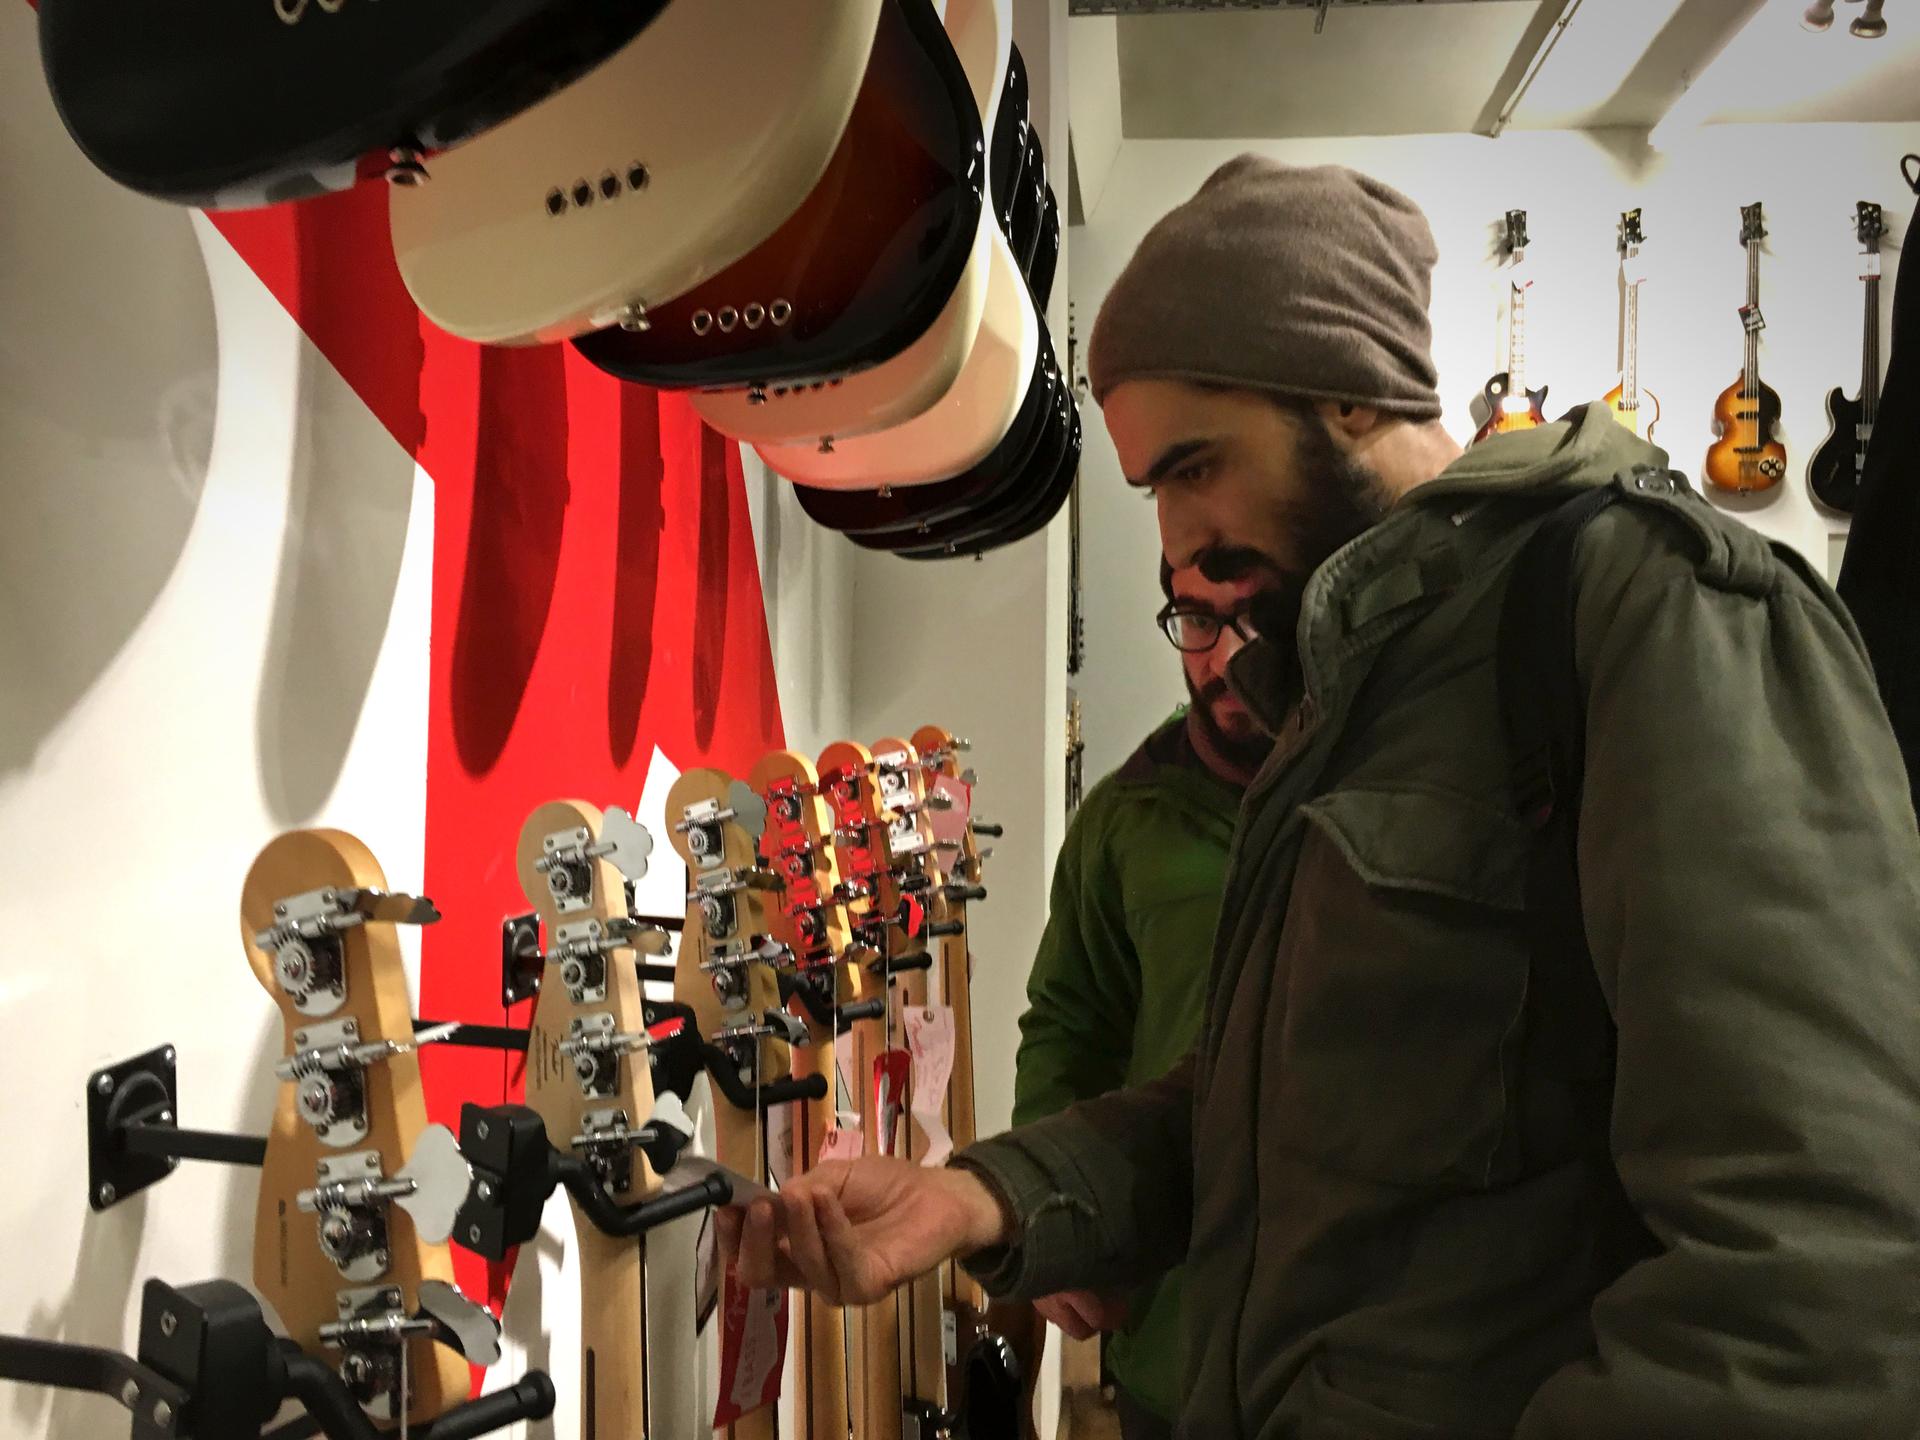 Anas Maghrebi at a music store in central Berlin. He and his Syrian band Khebez Dawle turned their journey from Turkey to Germany into a series of concerts.